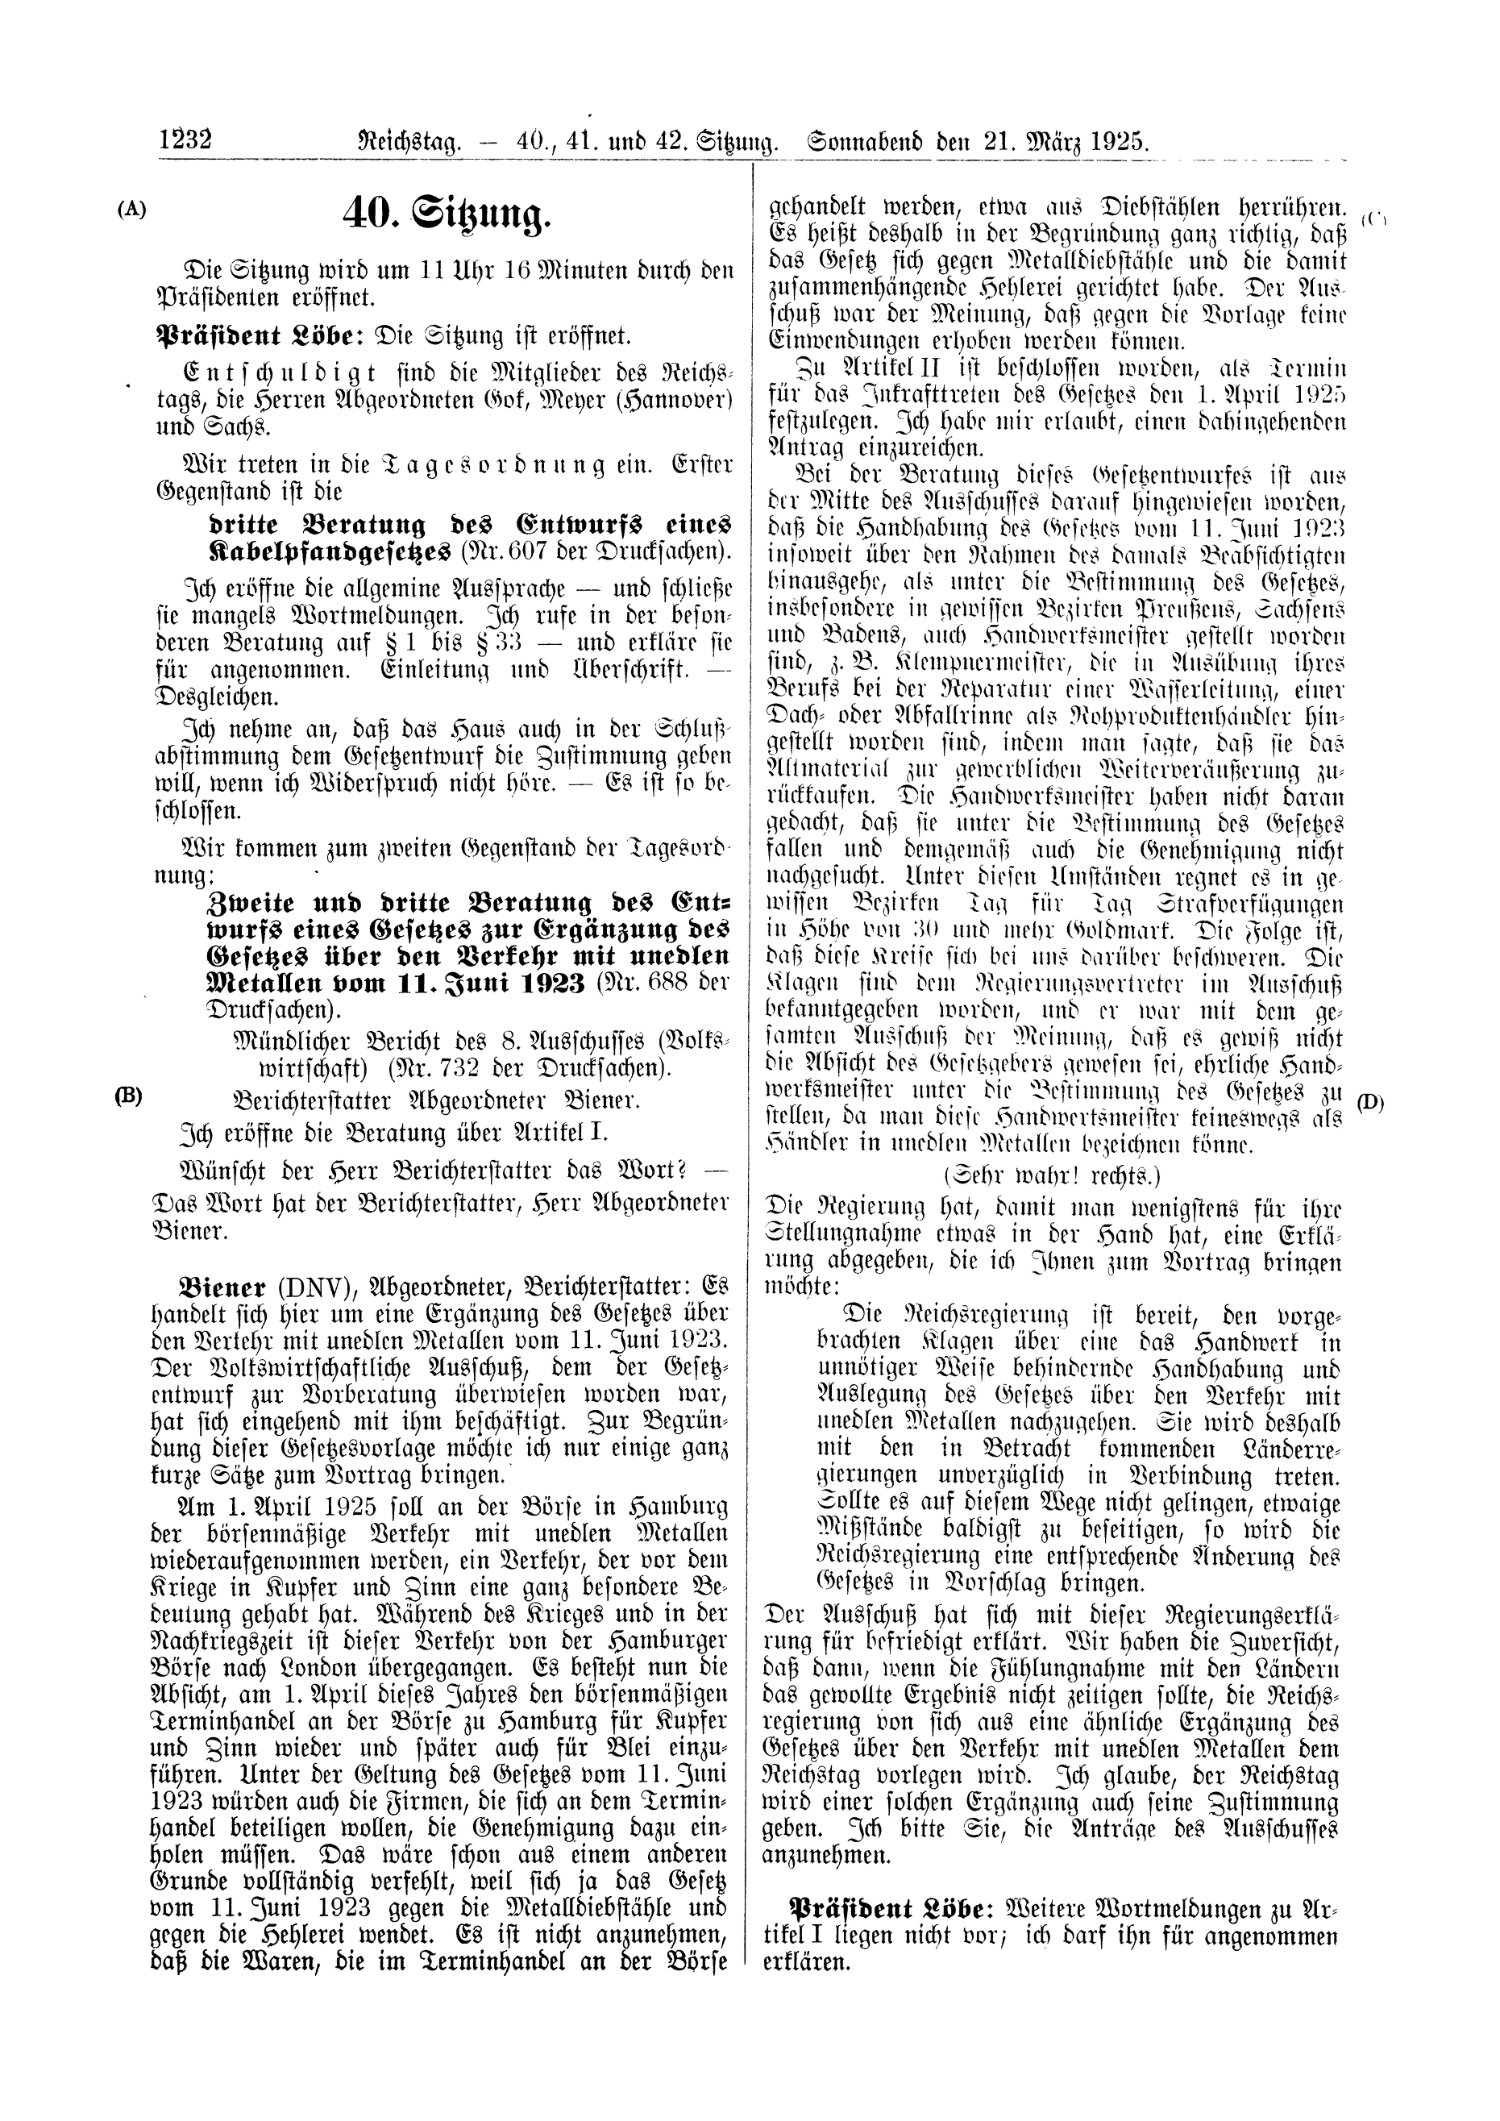 Scan of page 1232